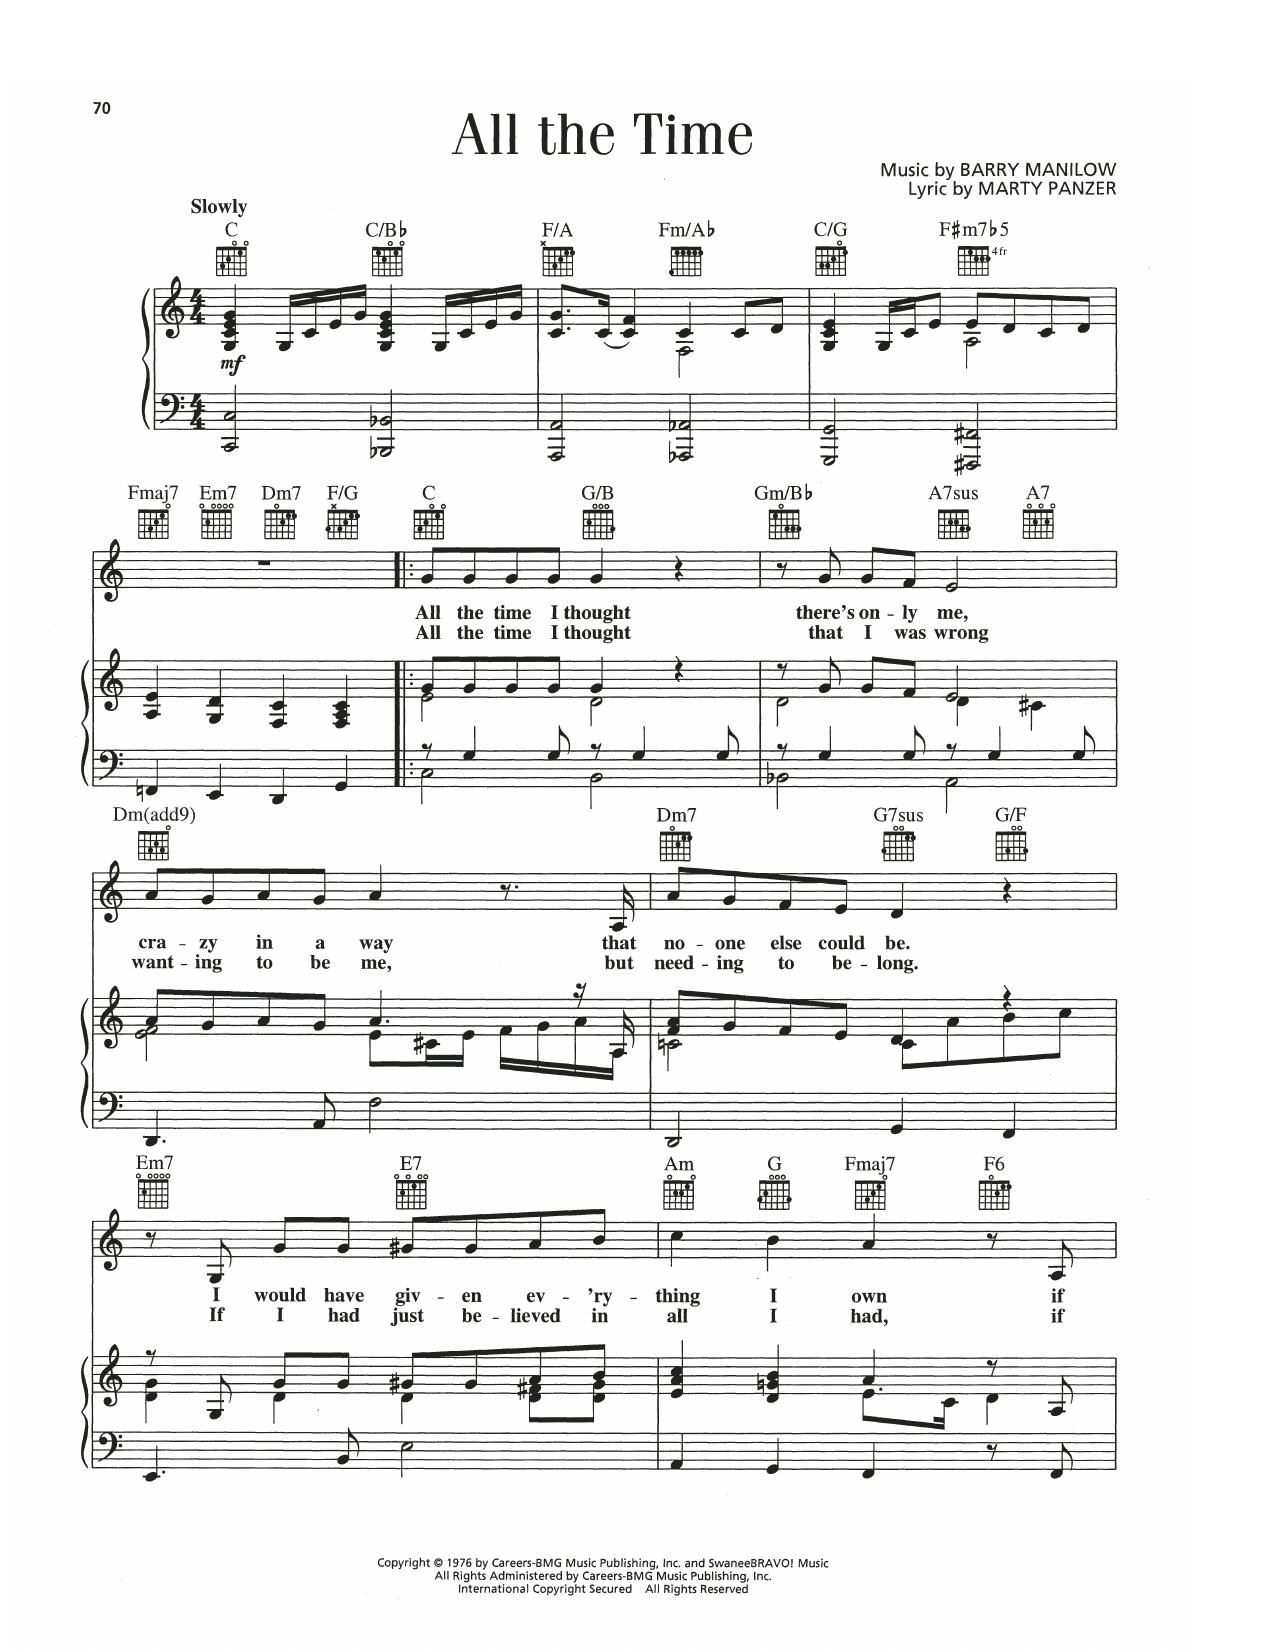 Download Barry Manilow All The Time Sheet Music